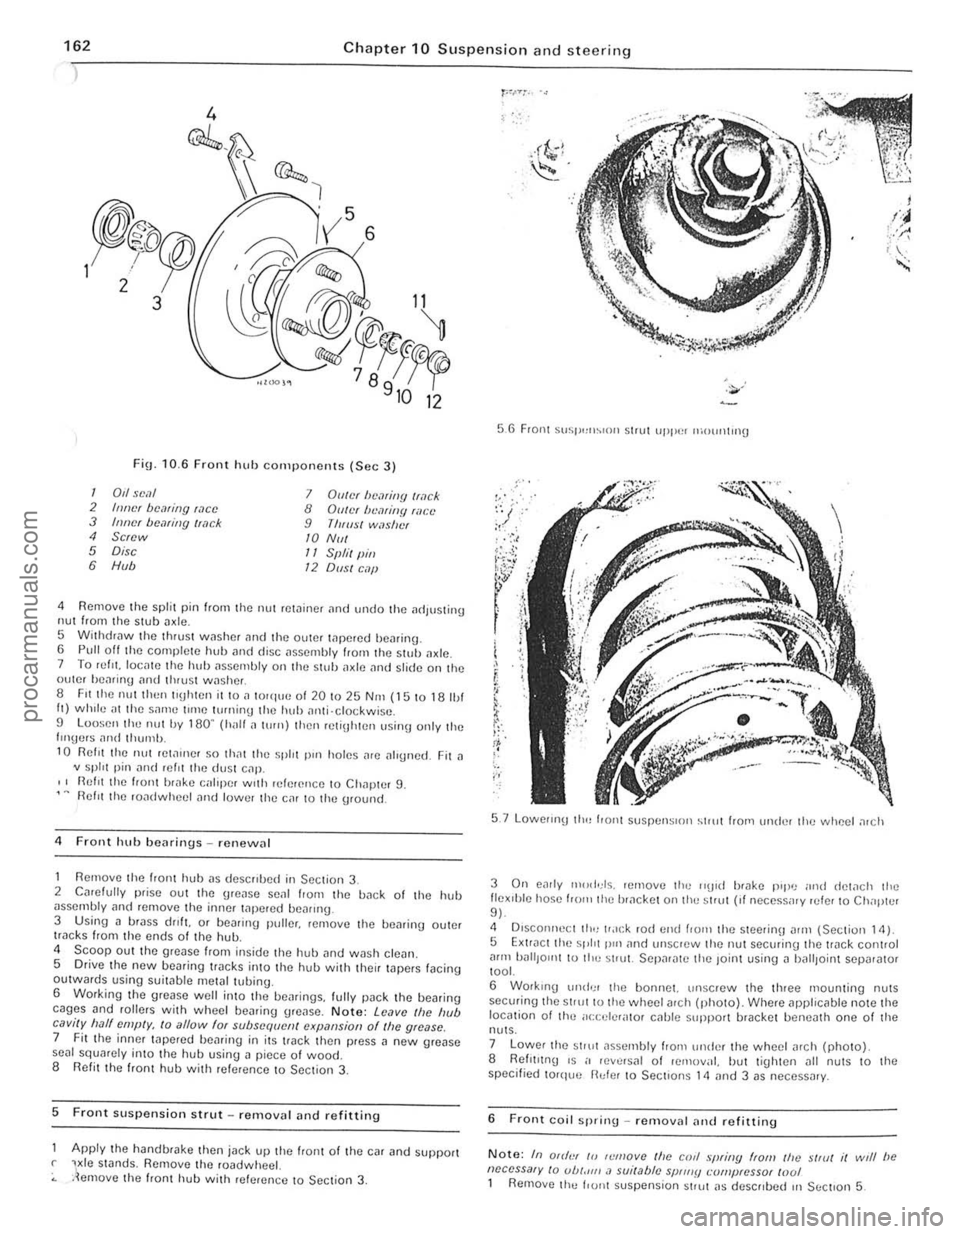 FORD CAPRI 1974  Workshop Manual 162 Chapte r 10 S uspension and  steering 
) 
Fin· 10.6 Front 
@",.,i 
, 5 
Y 6 
hub cOnll)oncnts (Sec 3) 
12 
1 0,1 seal 7 Diller be,?li/!{J Iwck 2 IIIlIcr bcaring wee 8 GUiN Iwmitlfl filct 3 Inner